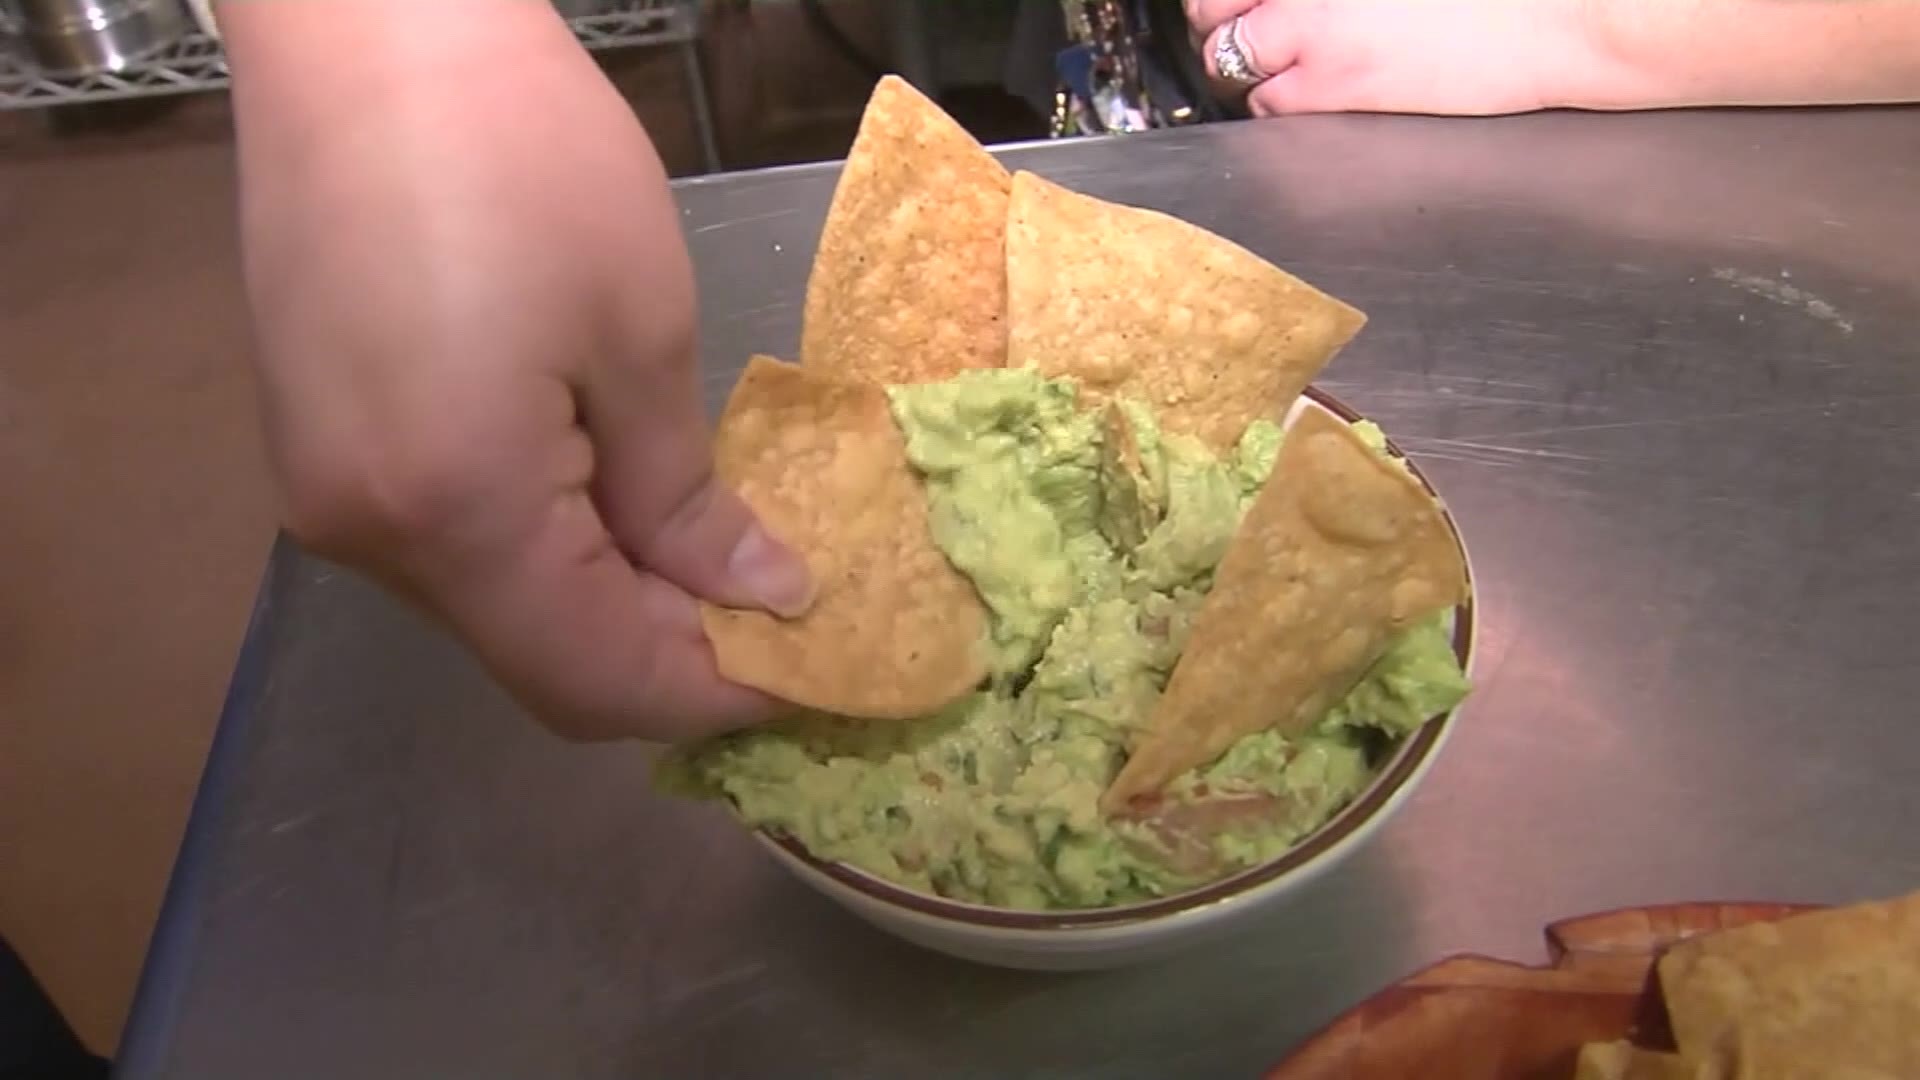 Chipotle is offering ‘Guac Mode’ to give free guacamole to Chipotle rewards members throughout 2020.
To get the freebie, you need to join the free Chipotle Rewards program by February 20.
Members will get one free side of guacamole -- or a free topping -- when they buy a regular-price entree.
The offer celebrates the upcoming one-year anniversary of the rewards program.